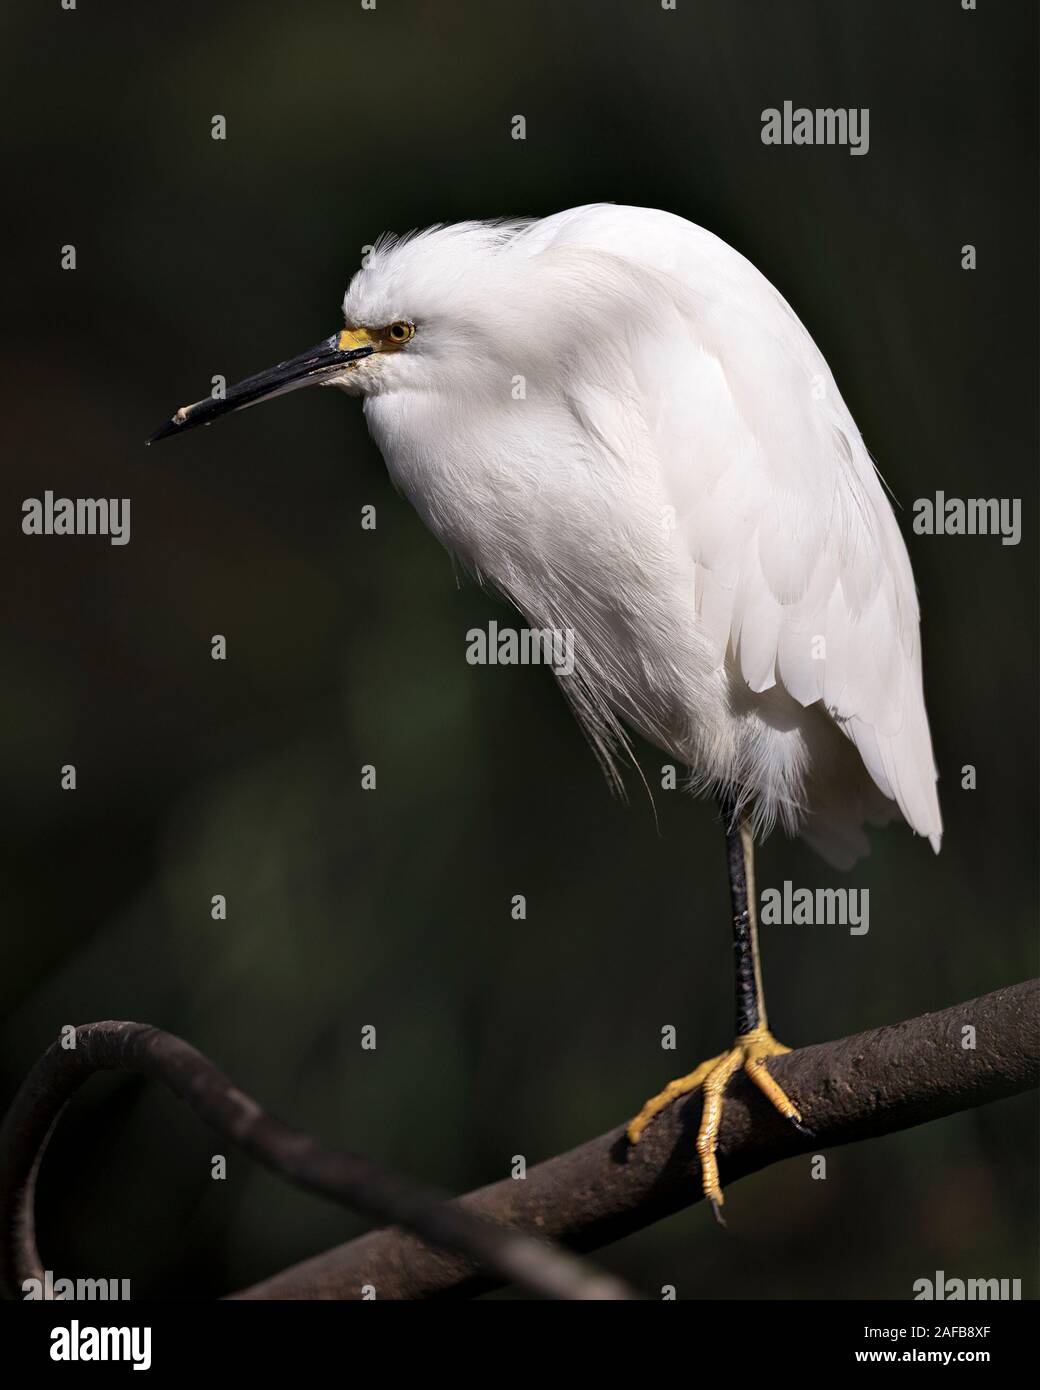 Snowy Egret close up profile view perched on branch displaying white plumage, head, beak, eye, feet in its environment and surrounding with a backgrou Stock Photo